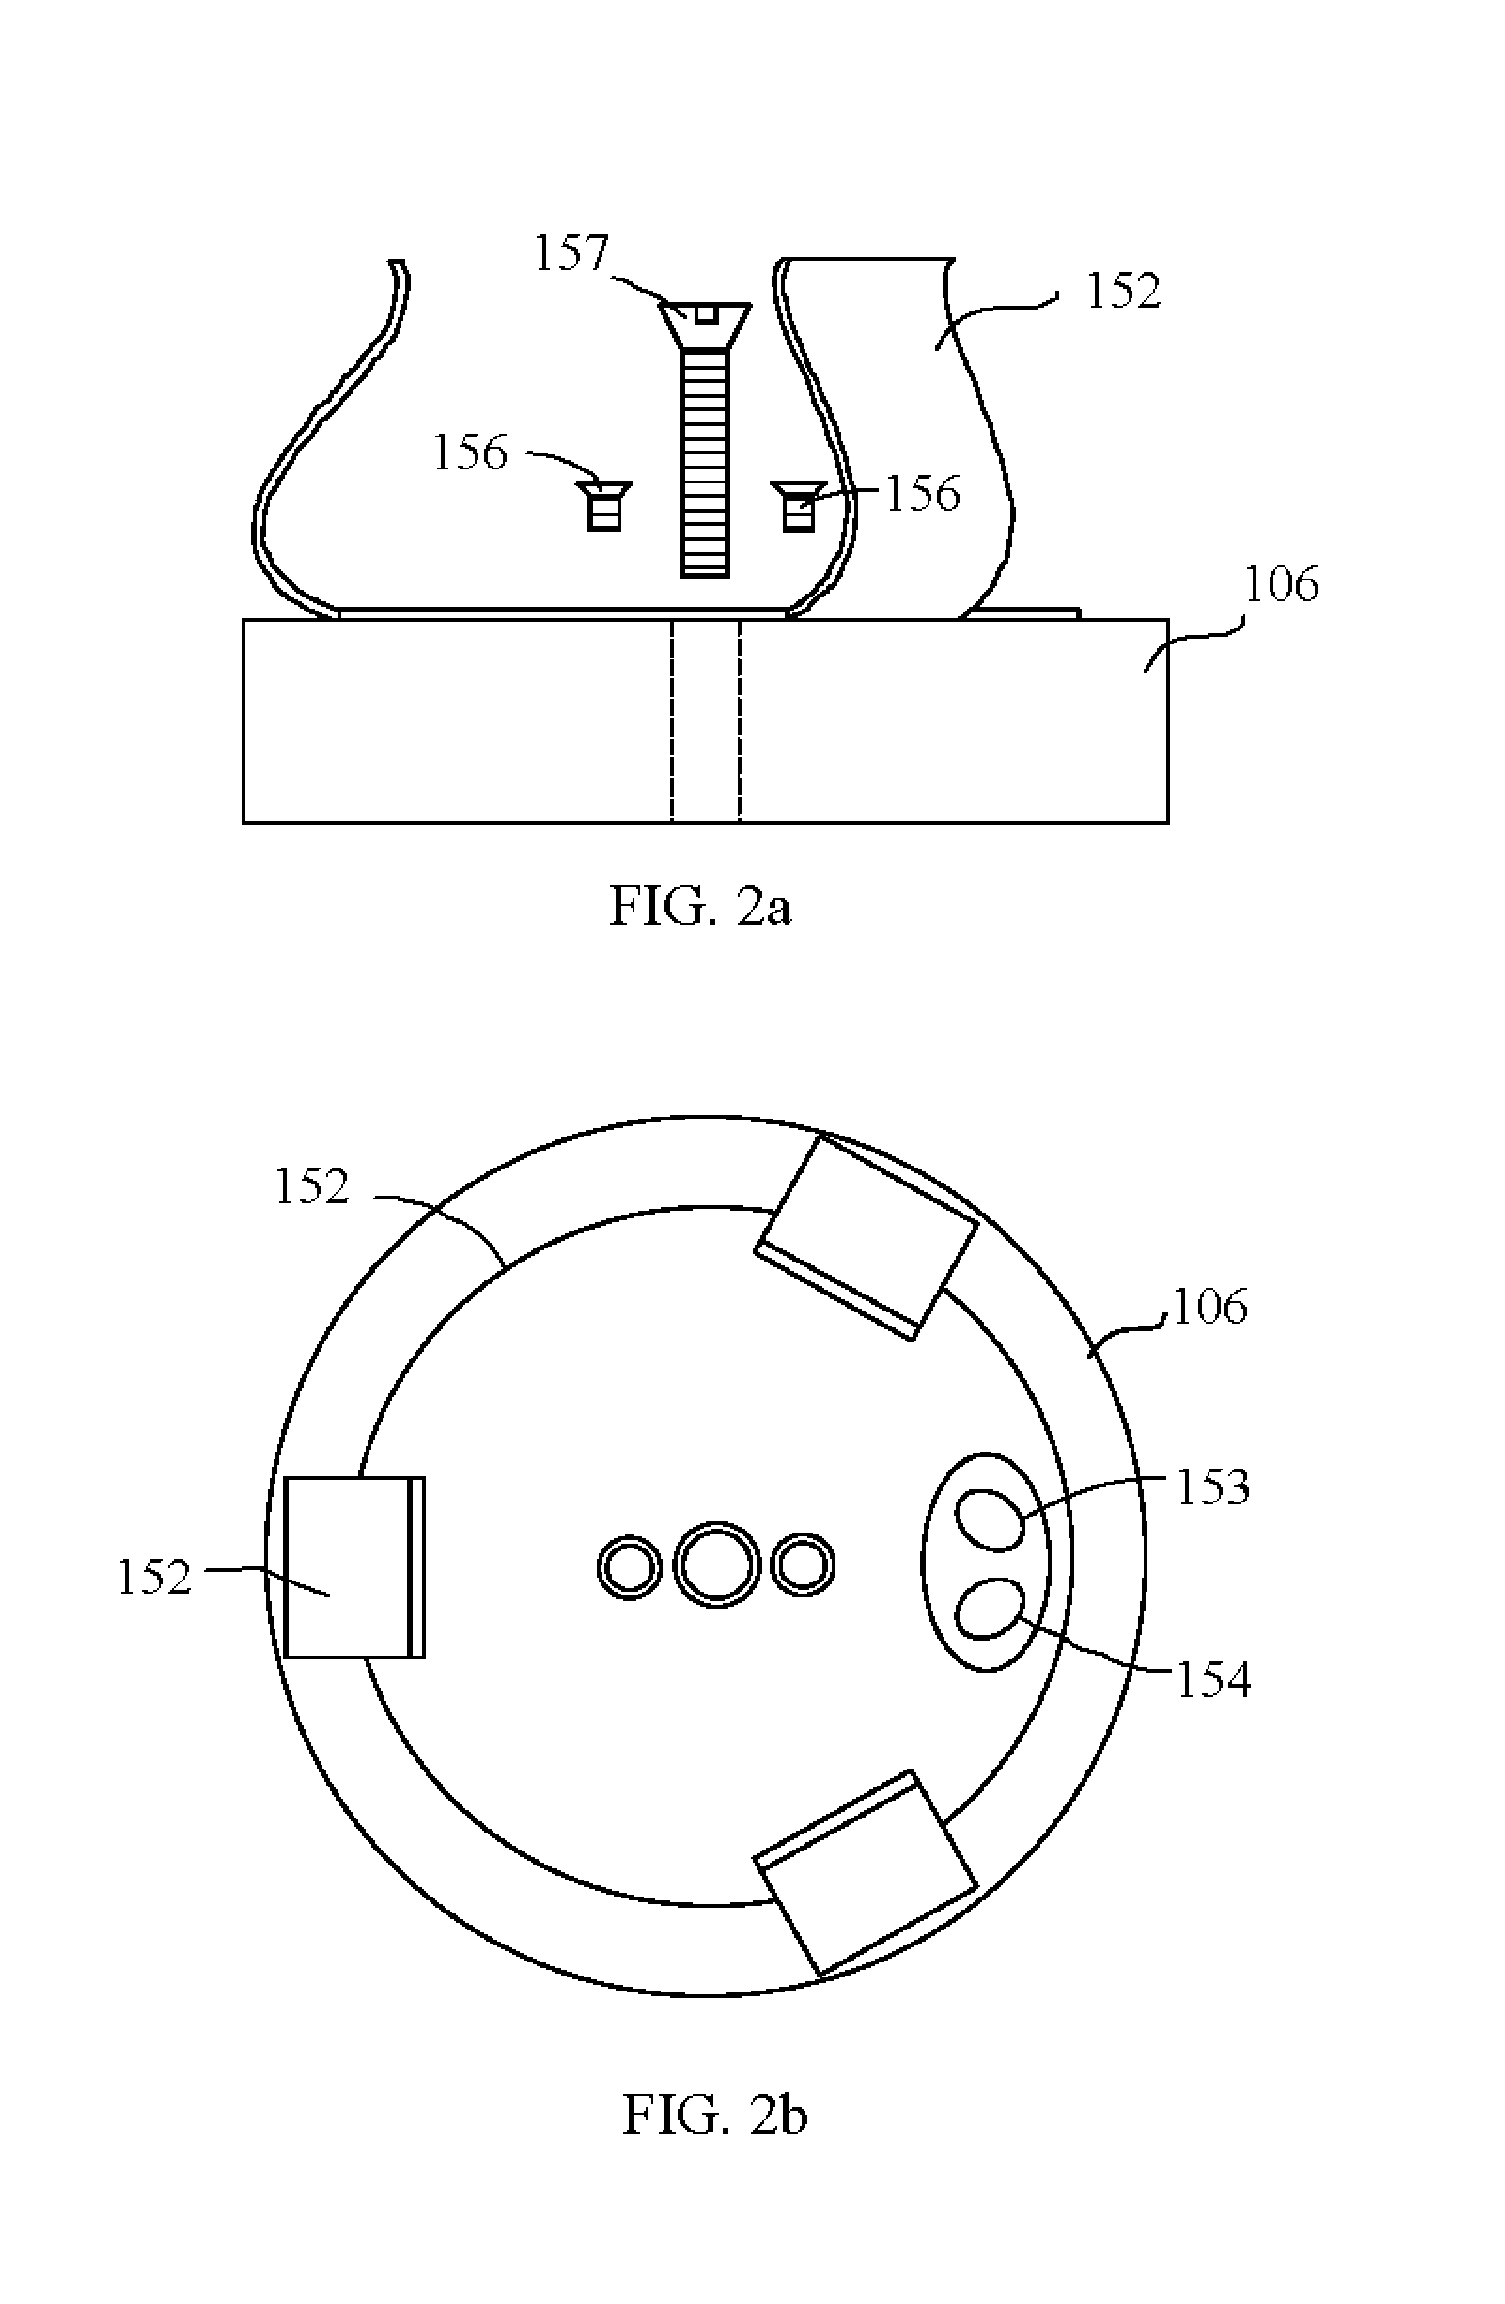 Apparatus and method for monitoring biological cell culture